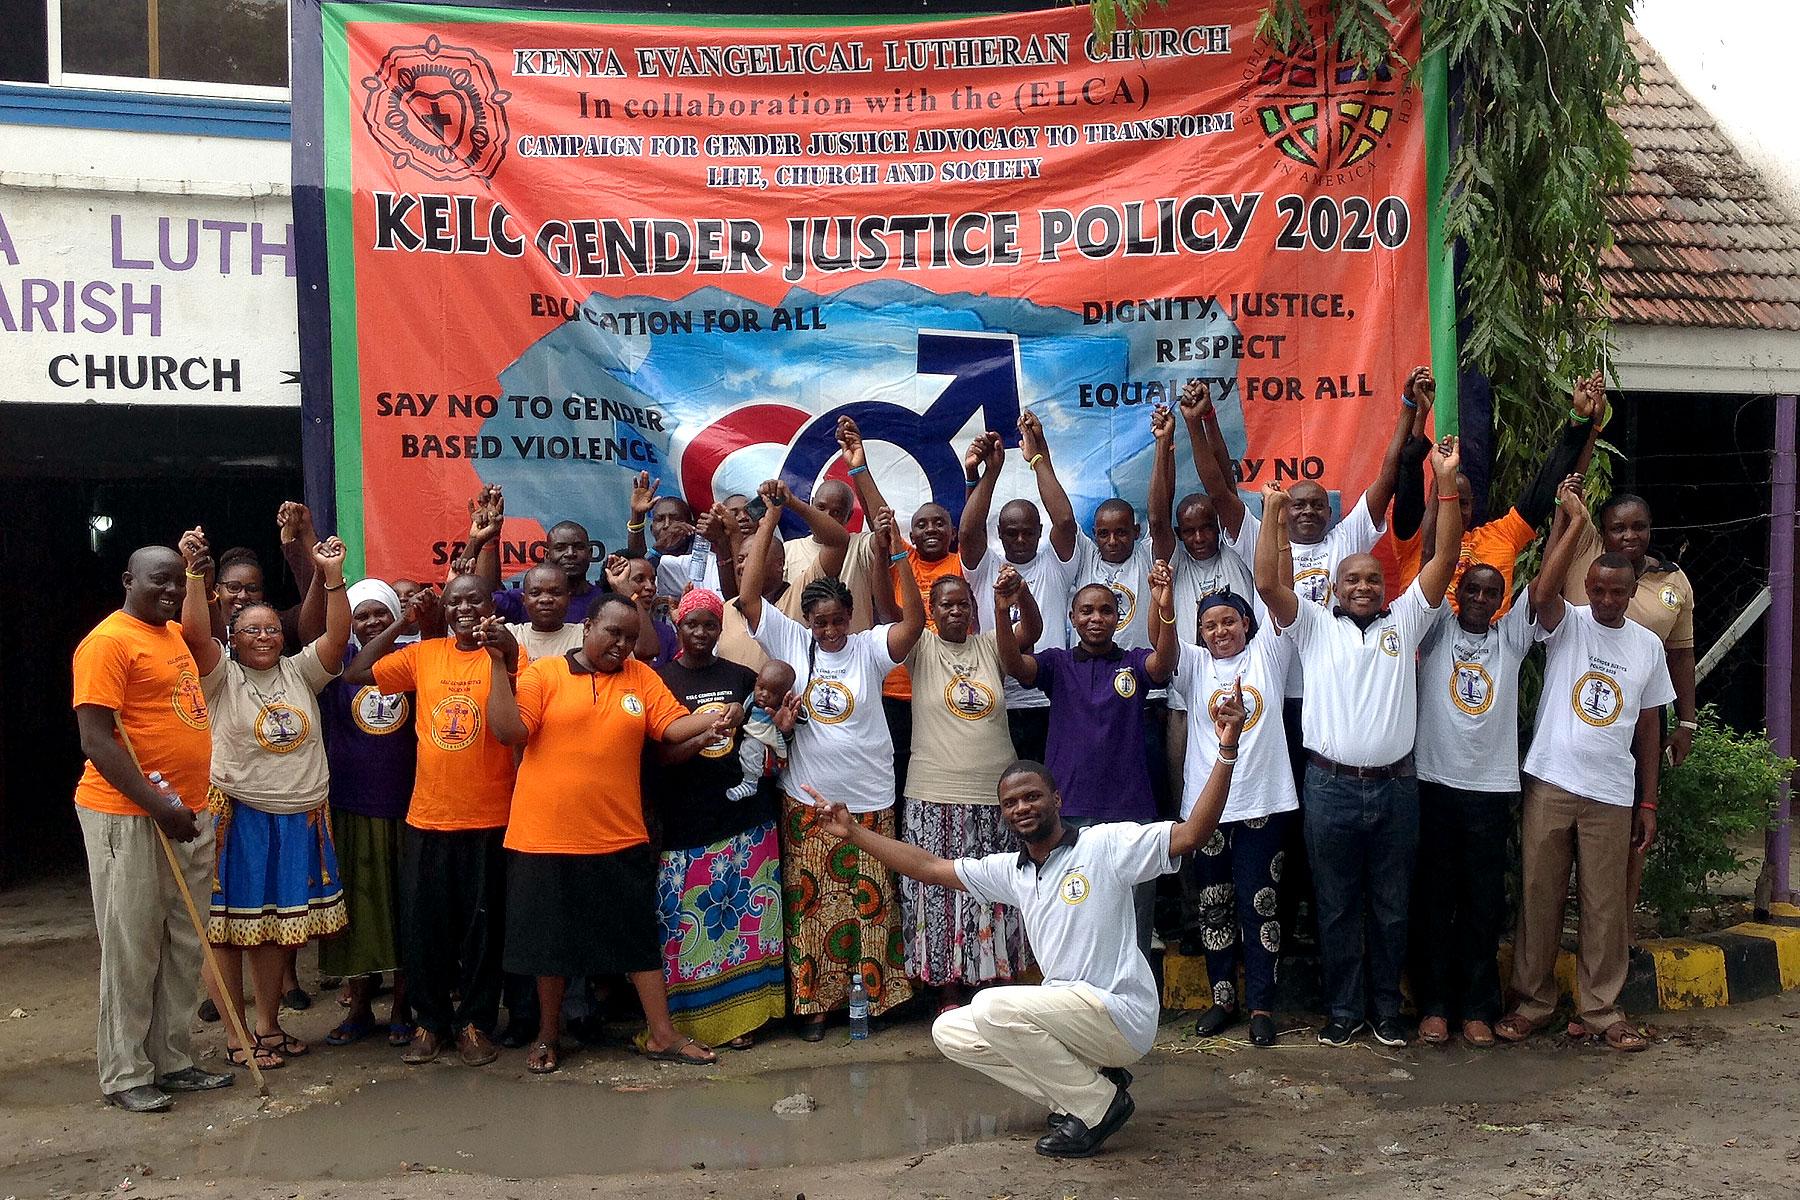 KELC South Coast Church District Gender Justice public participation forum in Mombasa, Kenya. Photo: L. Mwololo